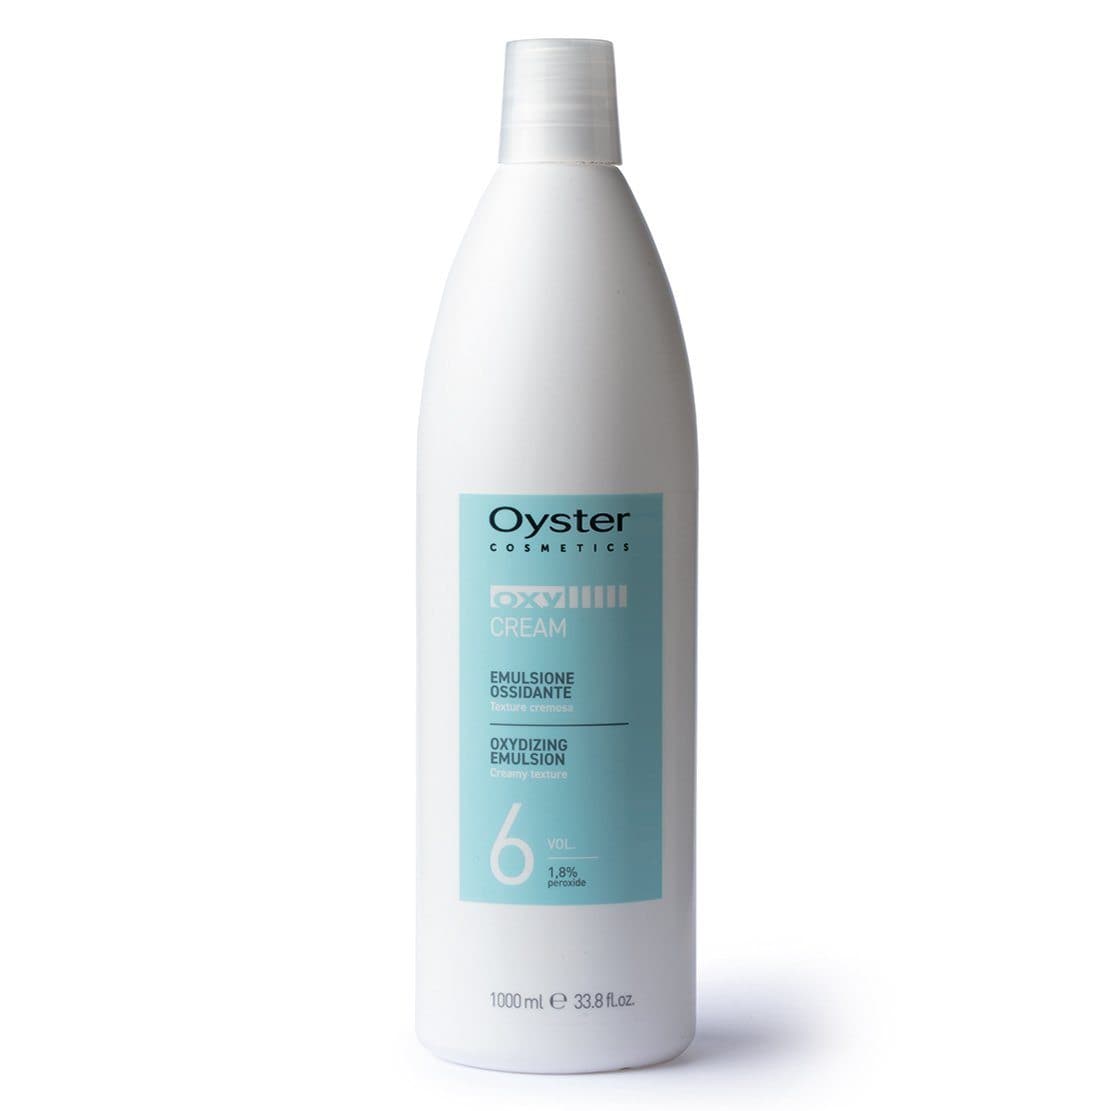 Oyster Oxy Cream Developer | 6 vol - 1.8% Peroxide HAIR COLOR OYSTER 1000ml / 1L 